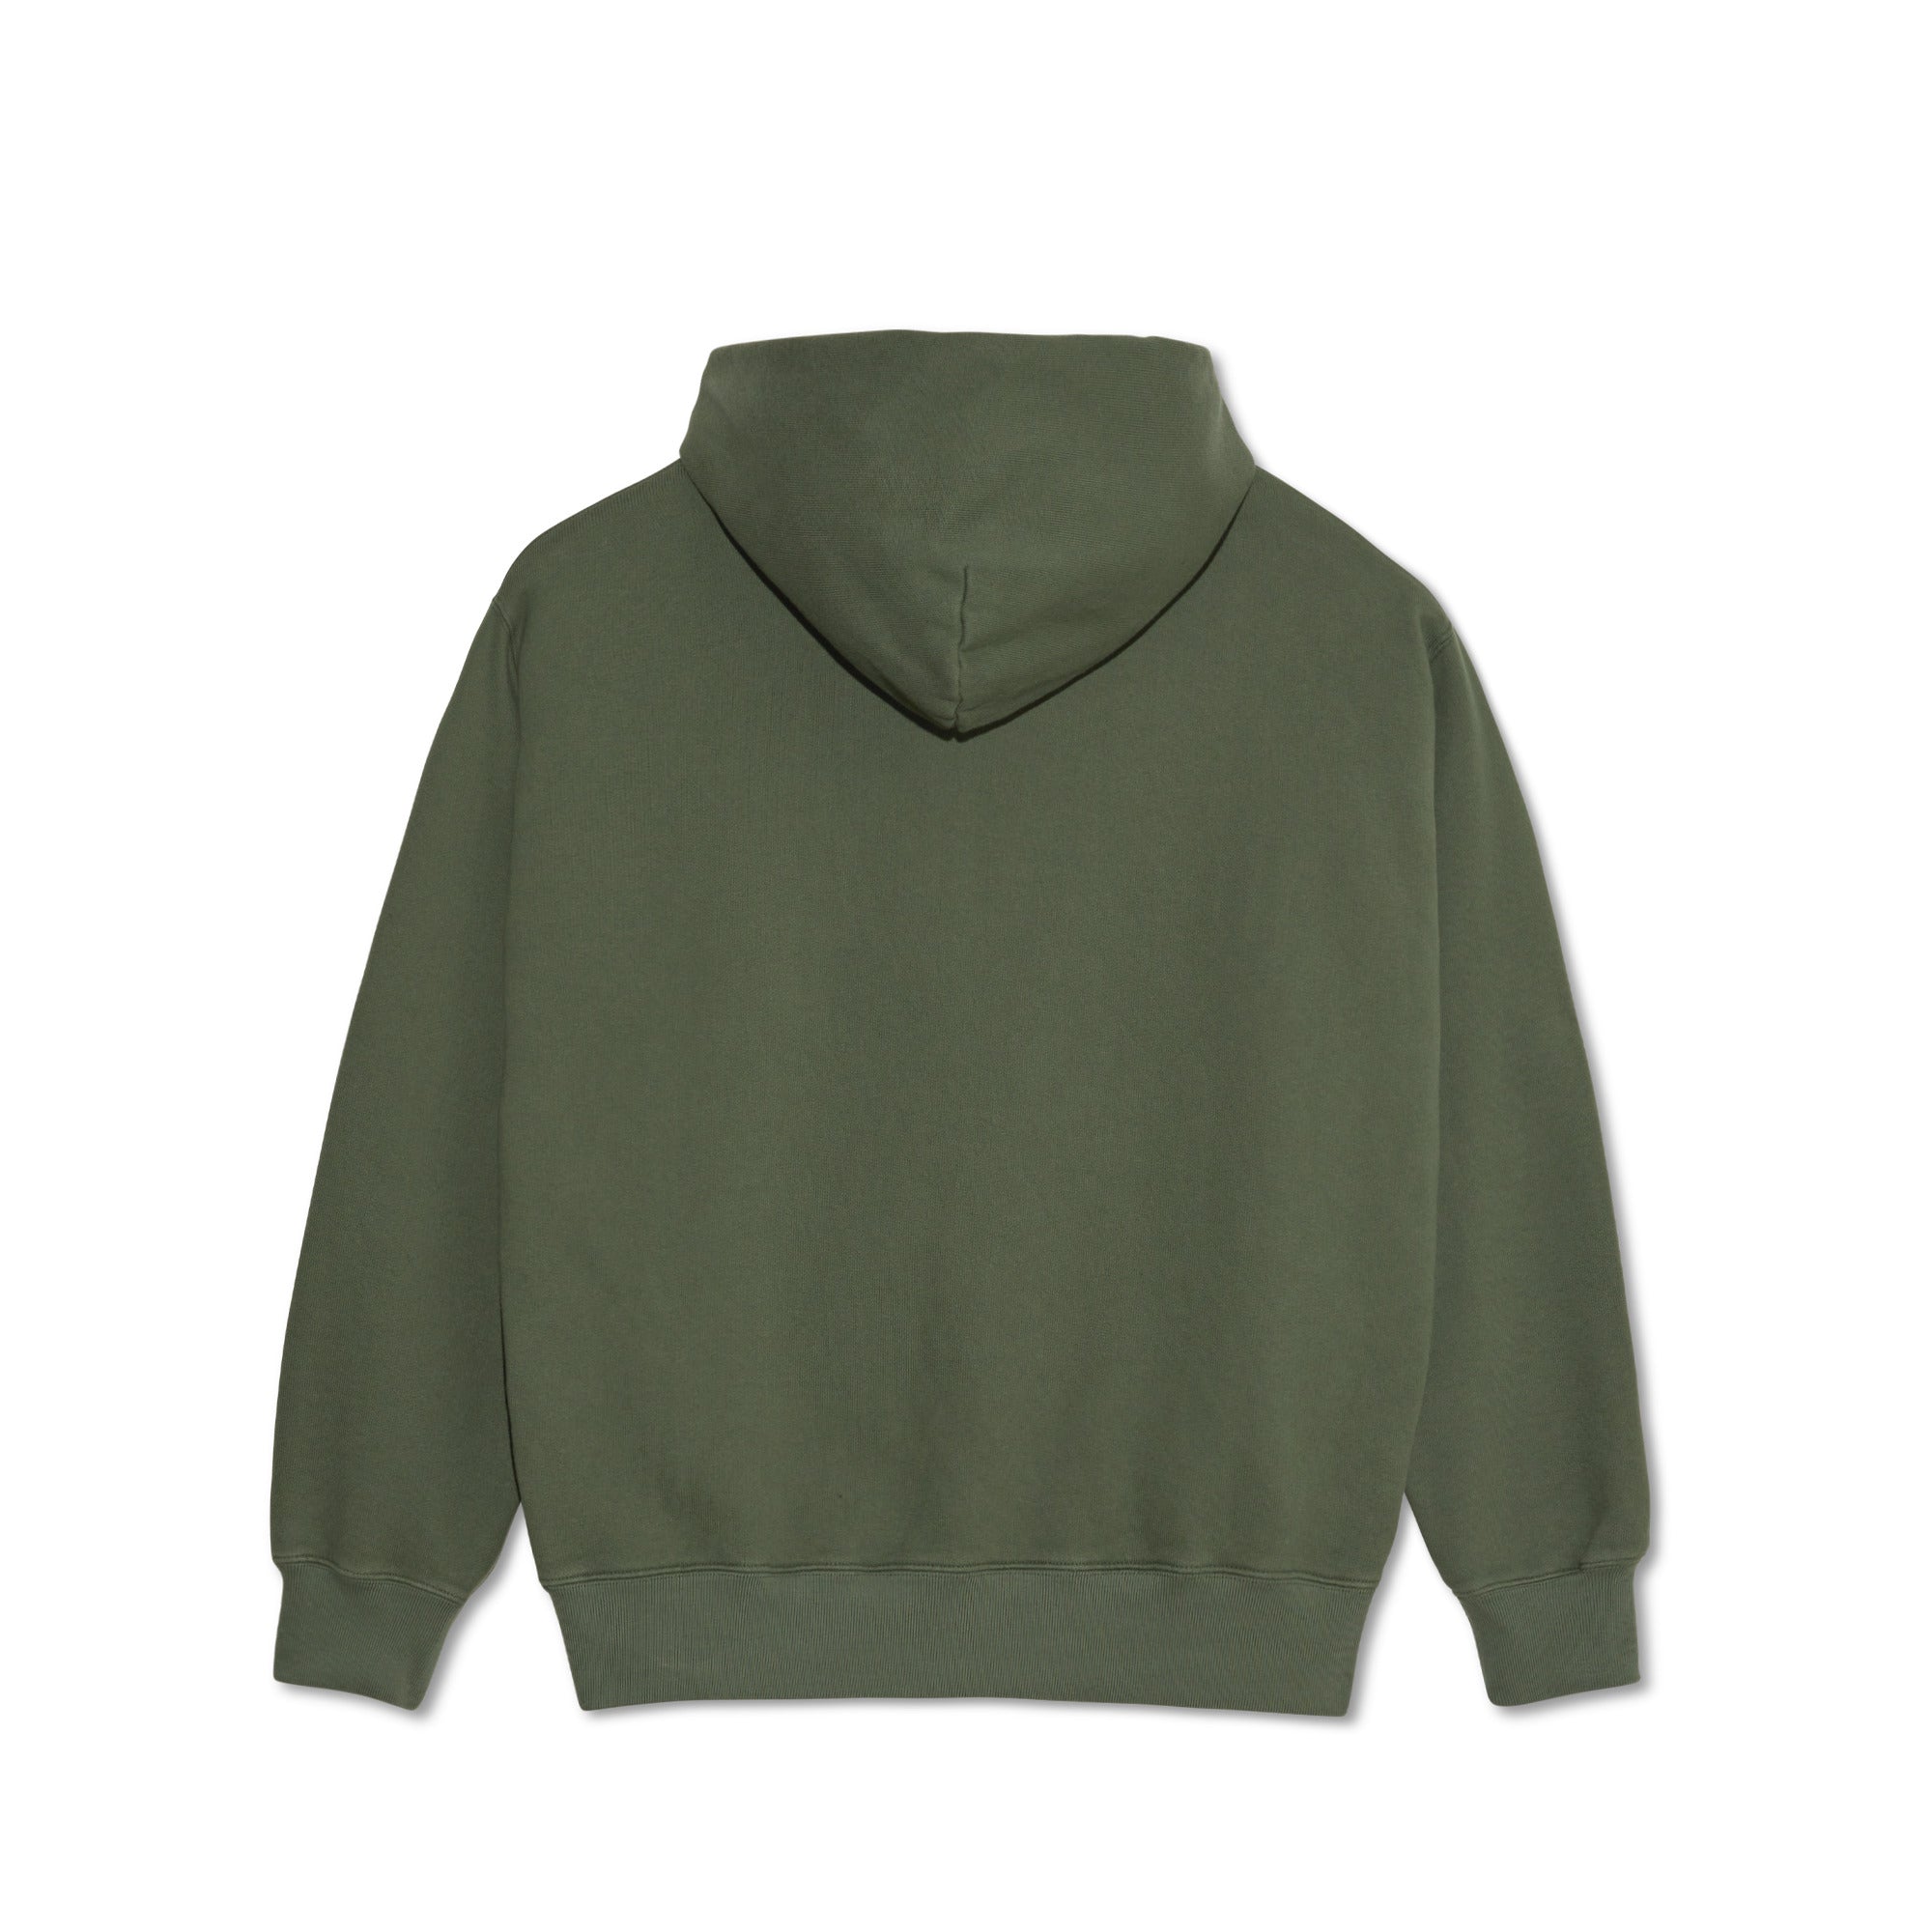 POLAR - We Blew It At Some Point Ed Hoodie "Grey Green"